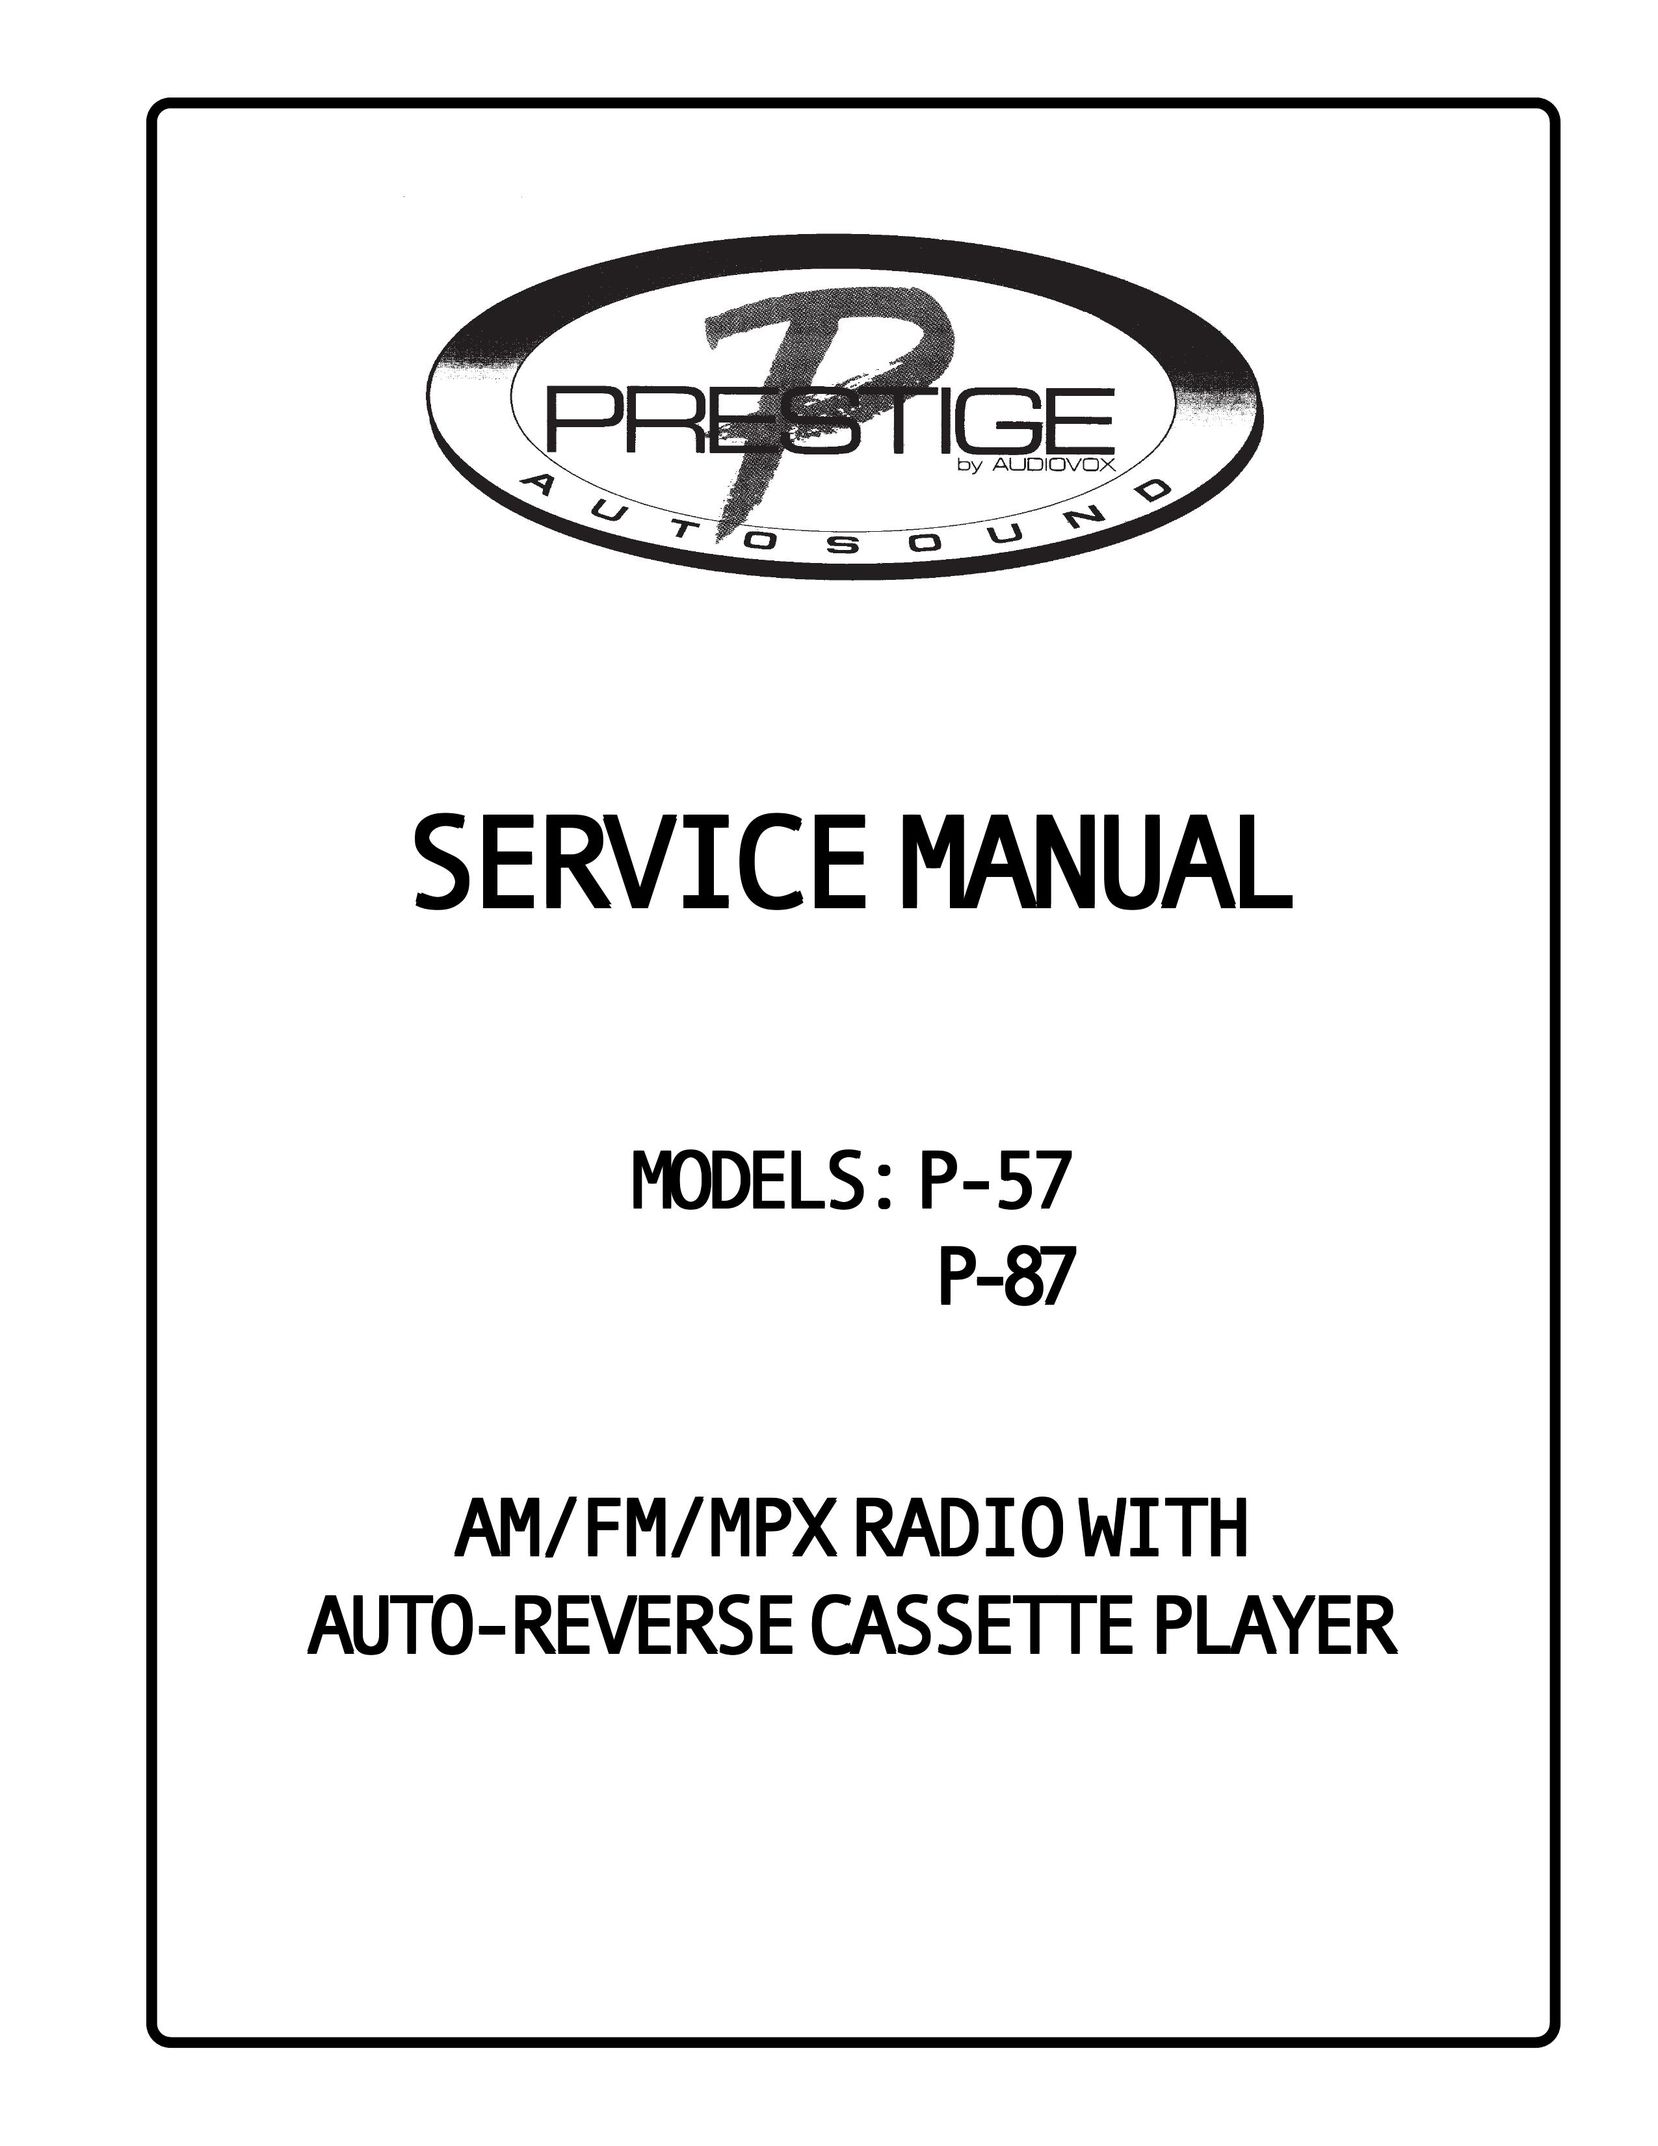 Audiovox P-57 Stereo System User Manual